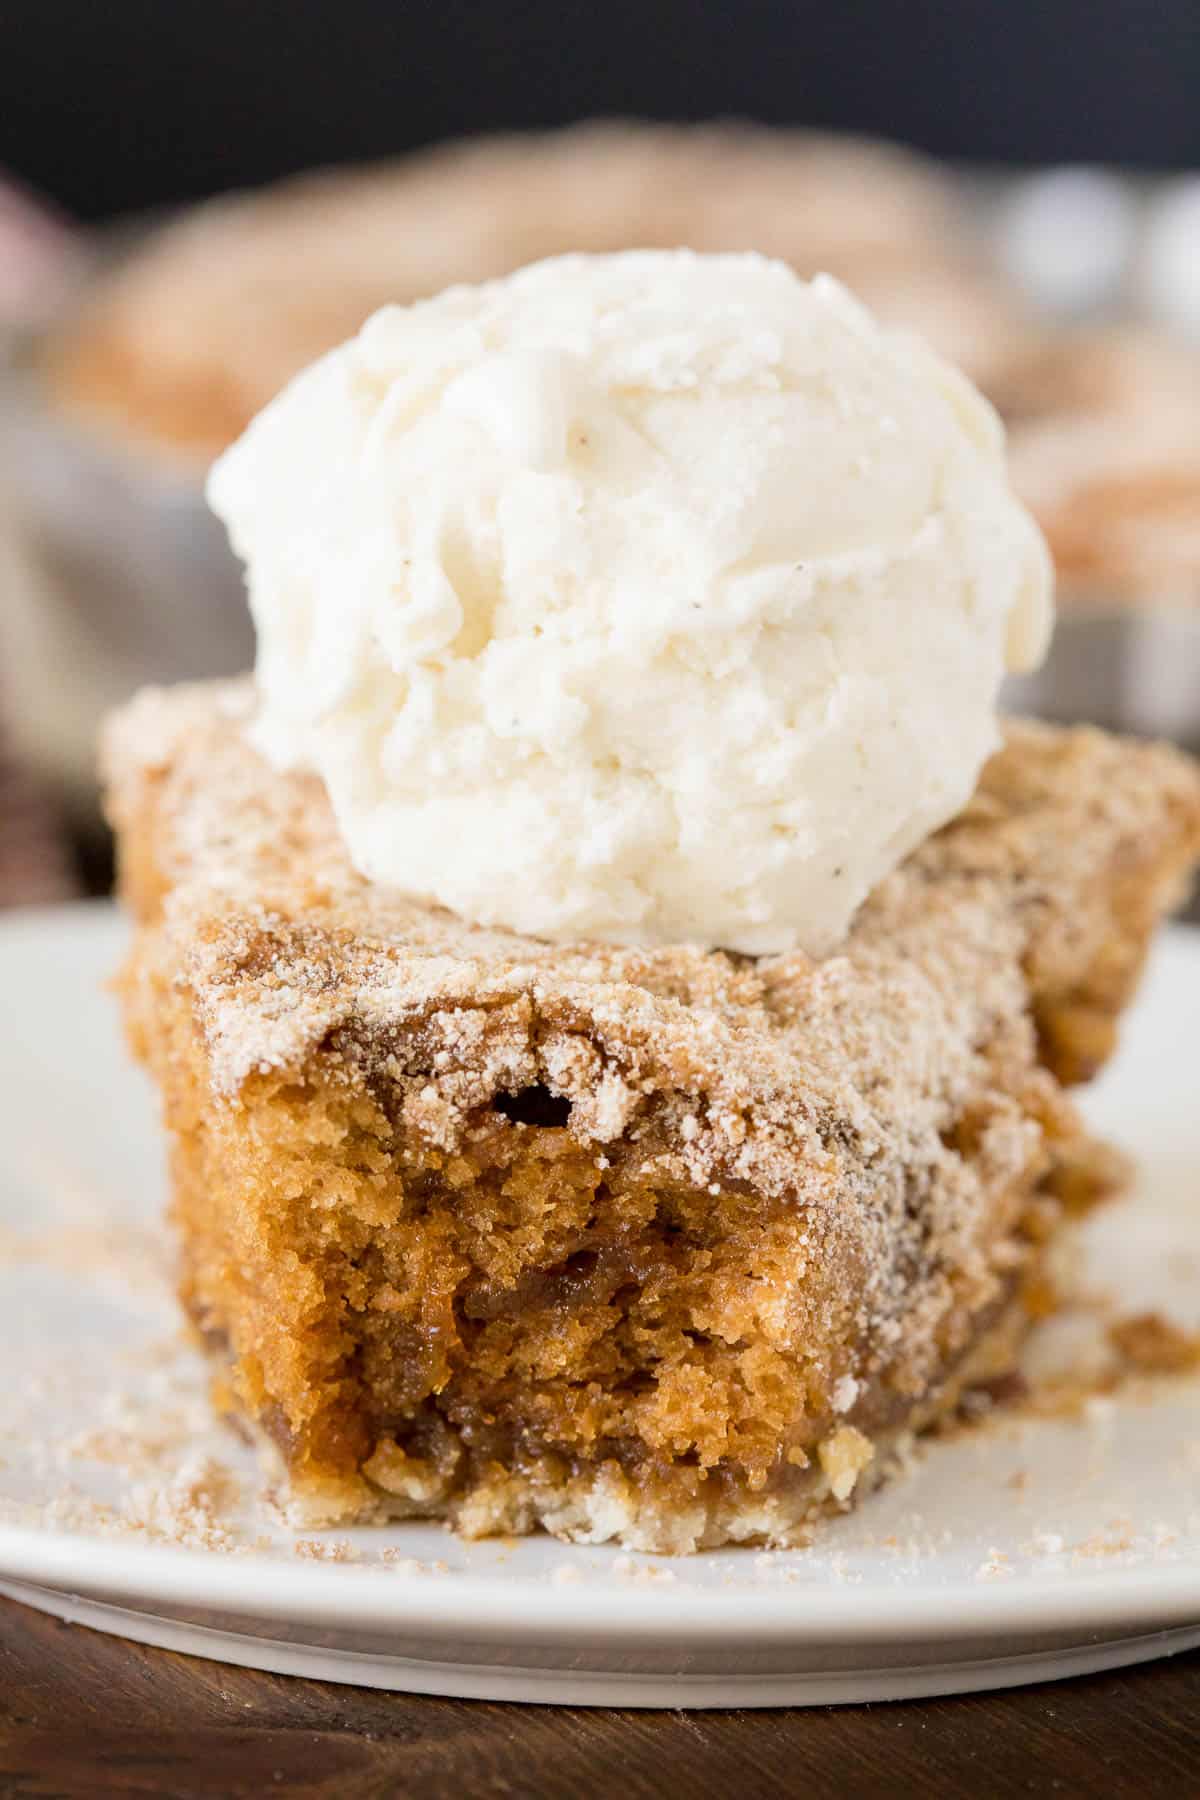 Shoofly Pie - A popular Pennsylvania Dutch pie recipe from the 1800s. Great with coffee or a scoop of ice cream! A vintage dessert perfect for parties.